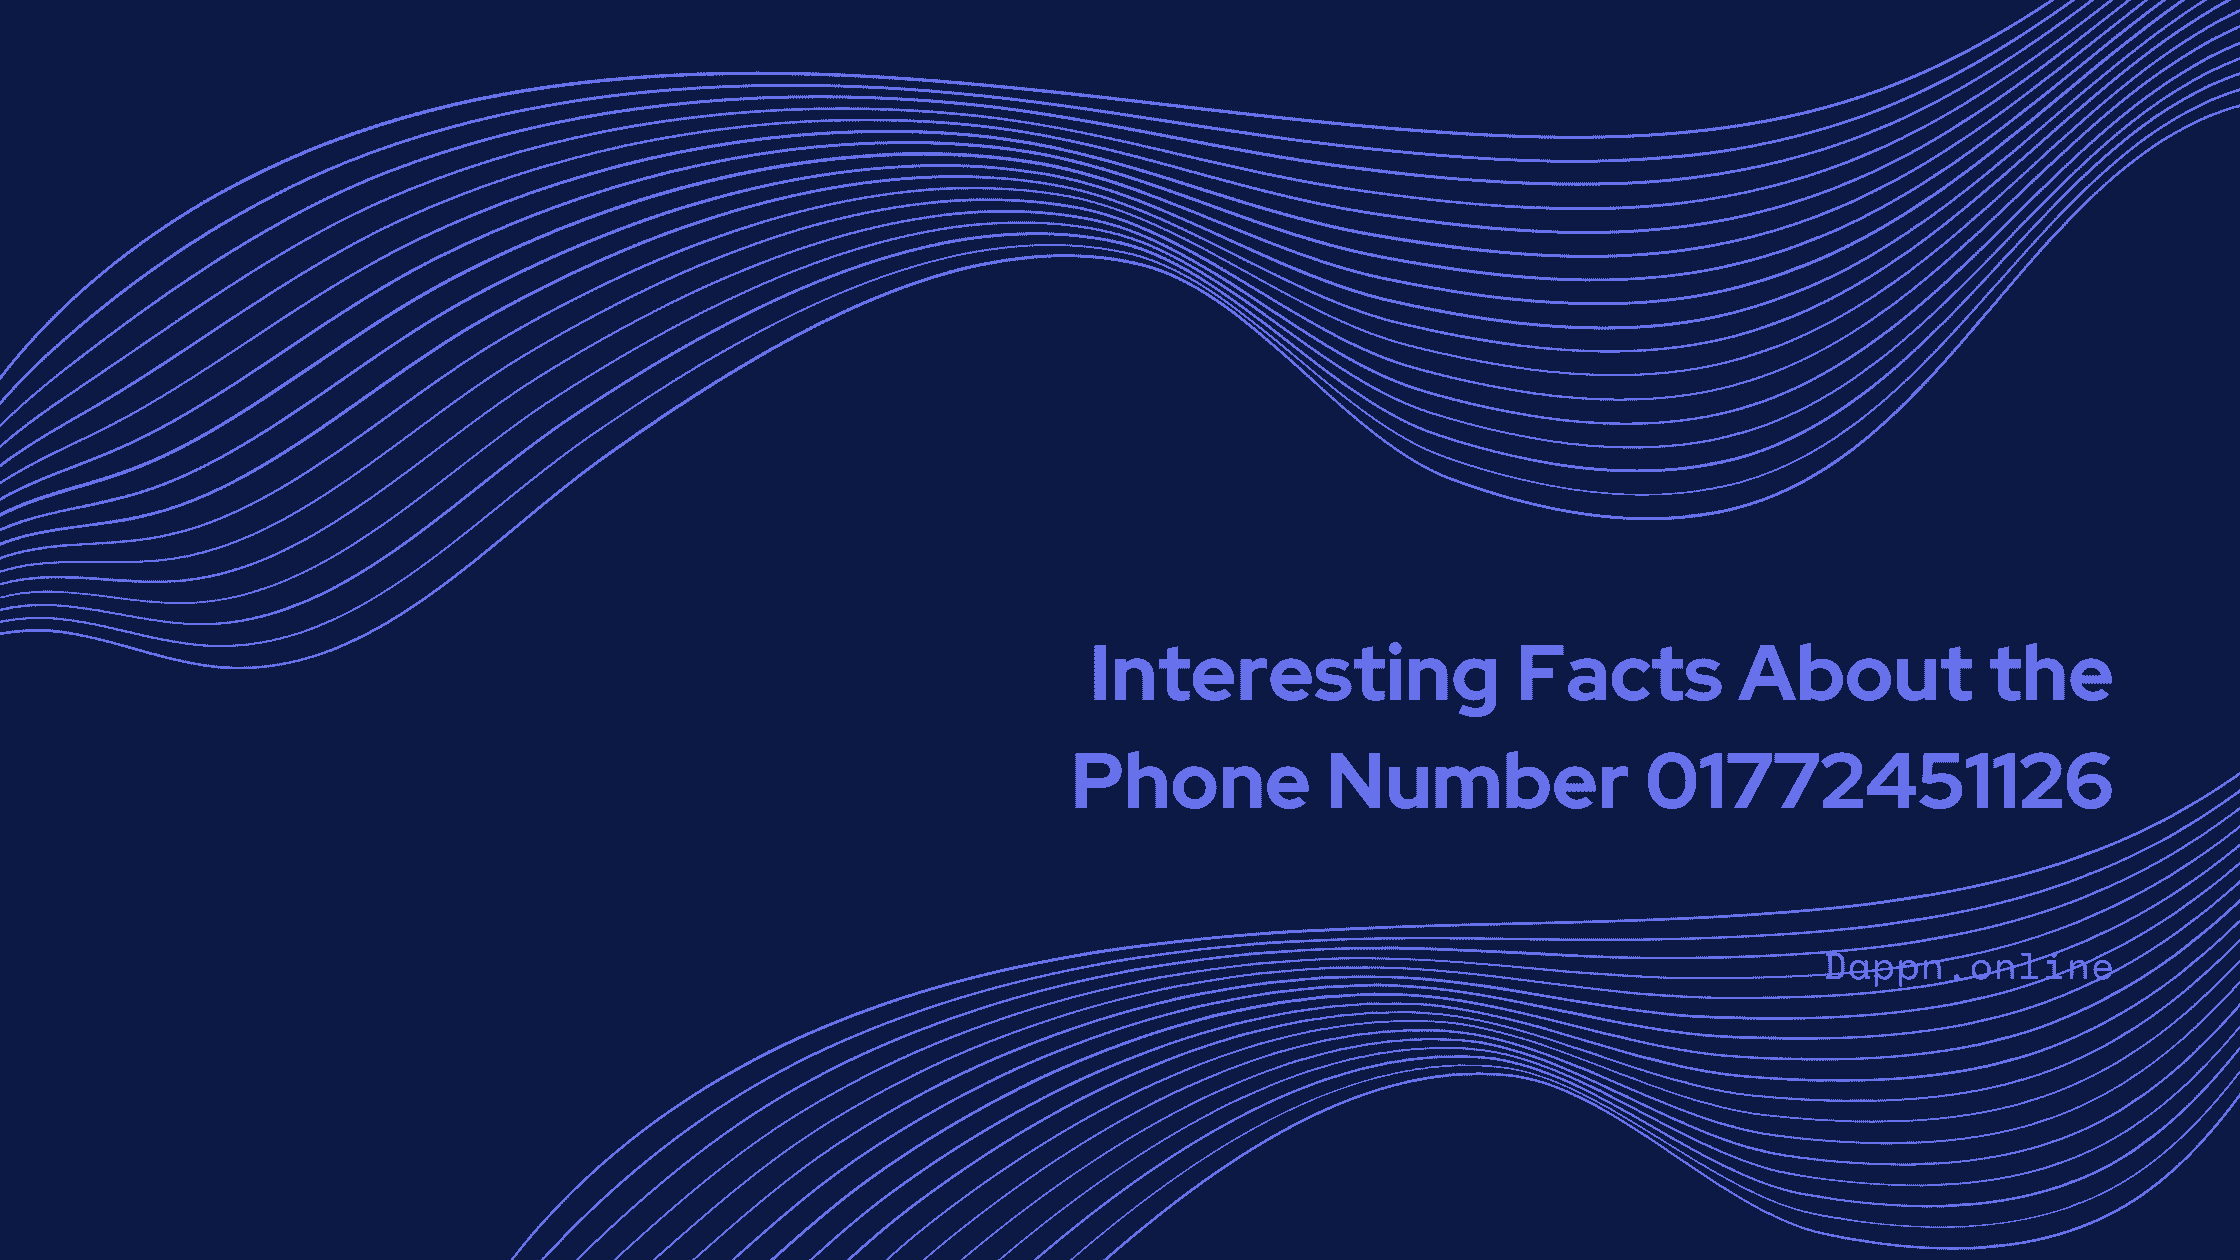 Interesting Facts About the Phone Number 01772451126